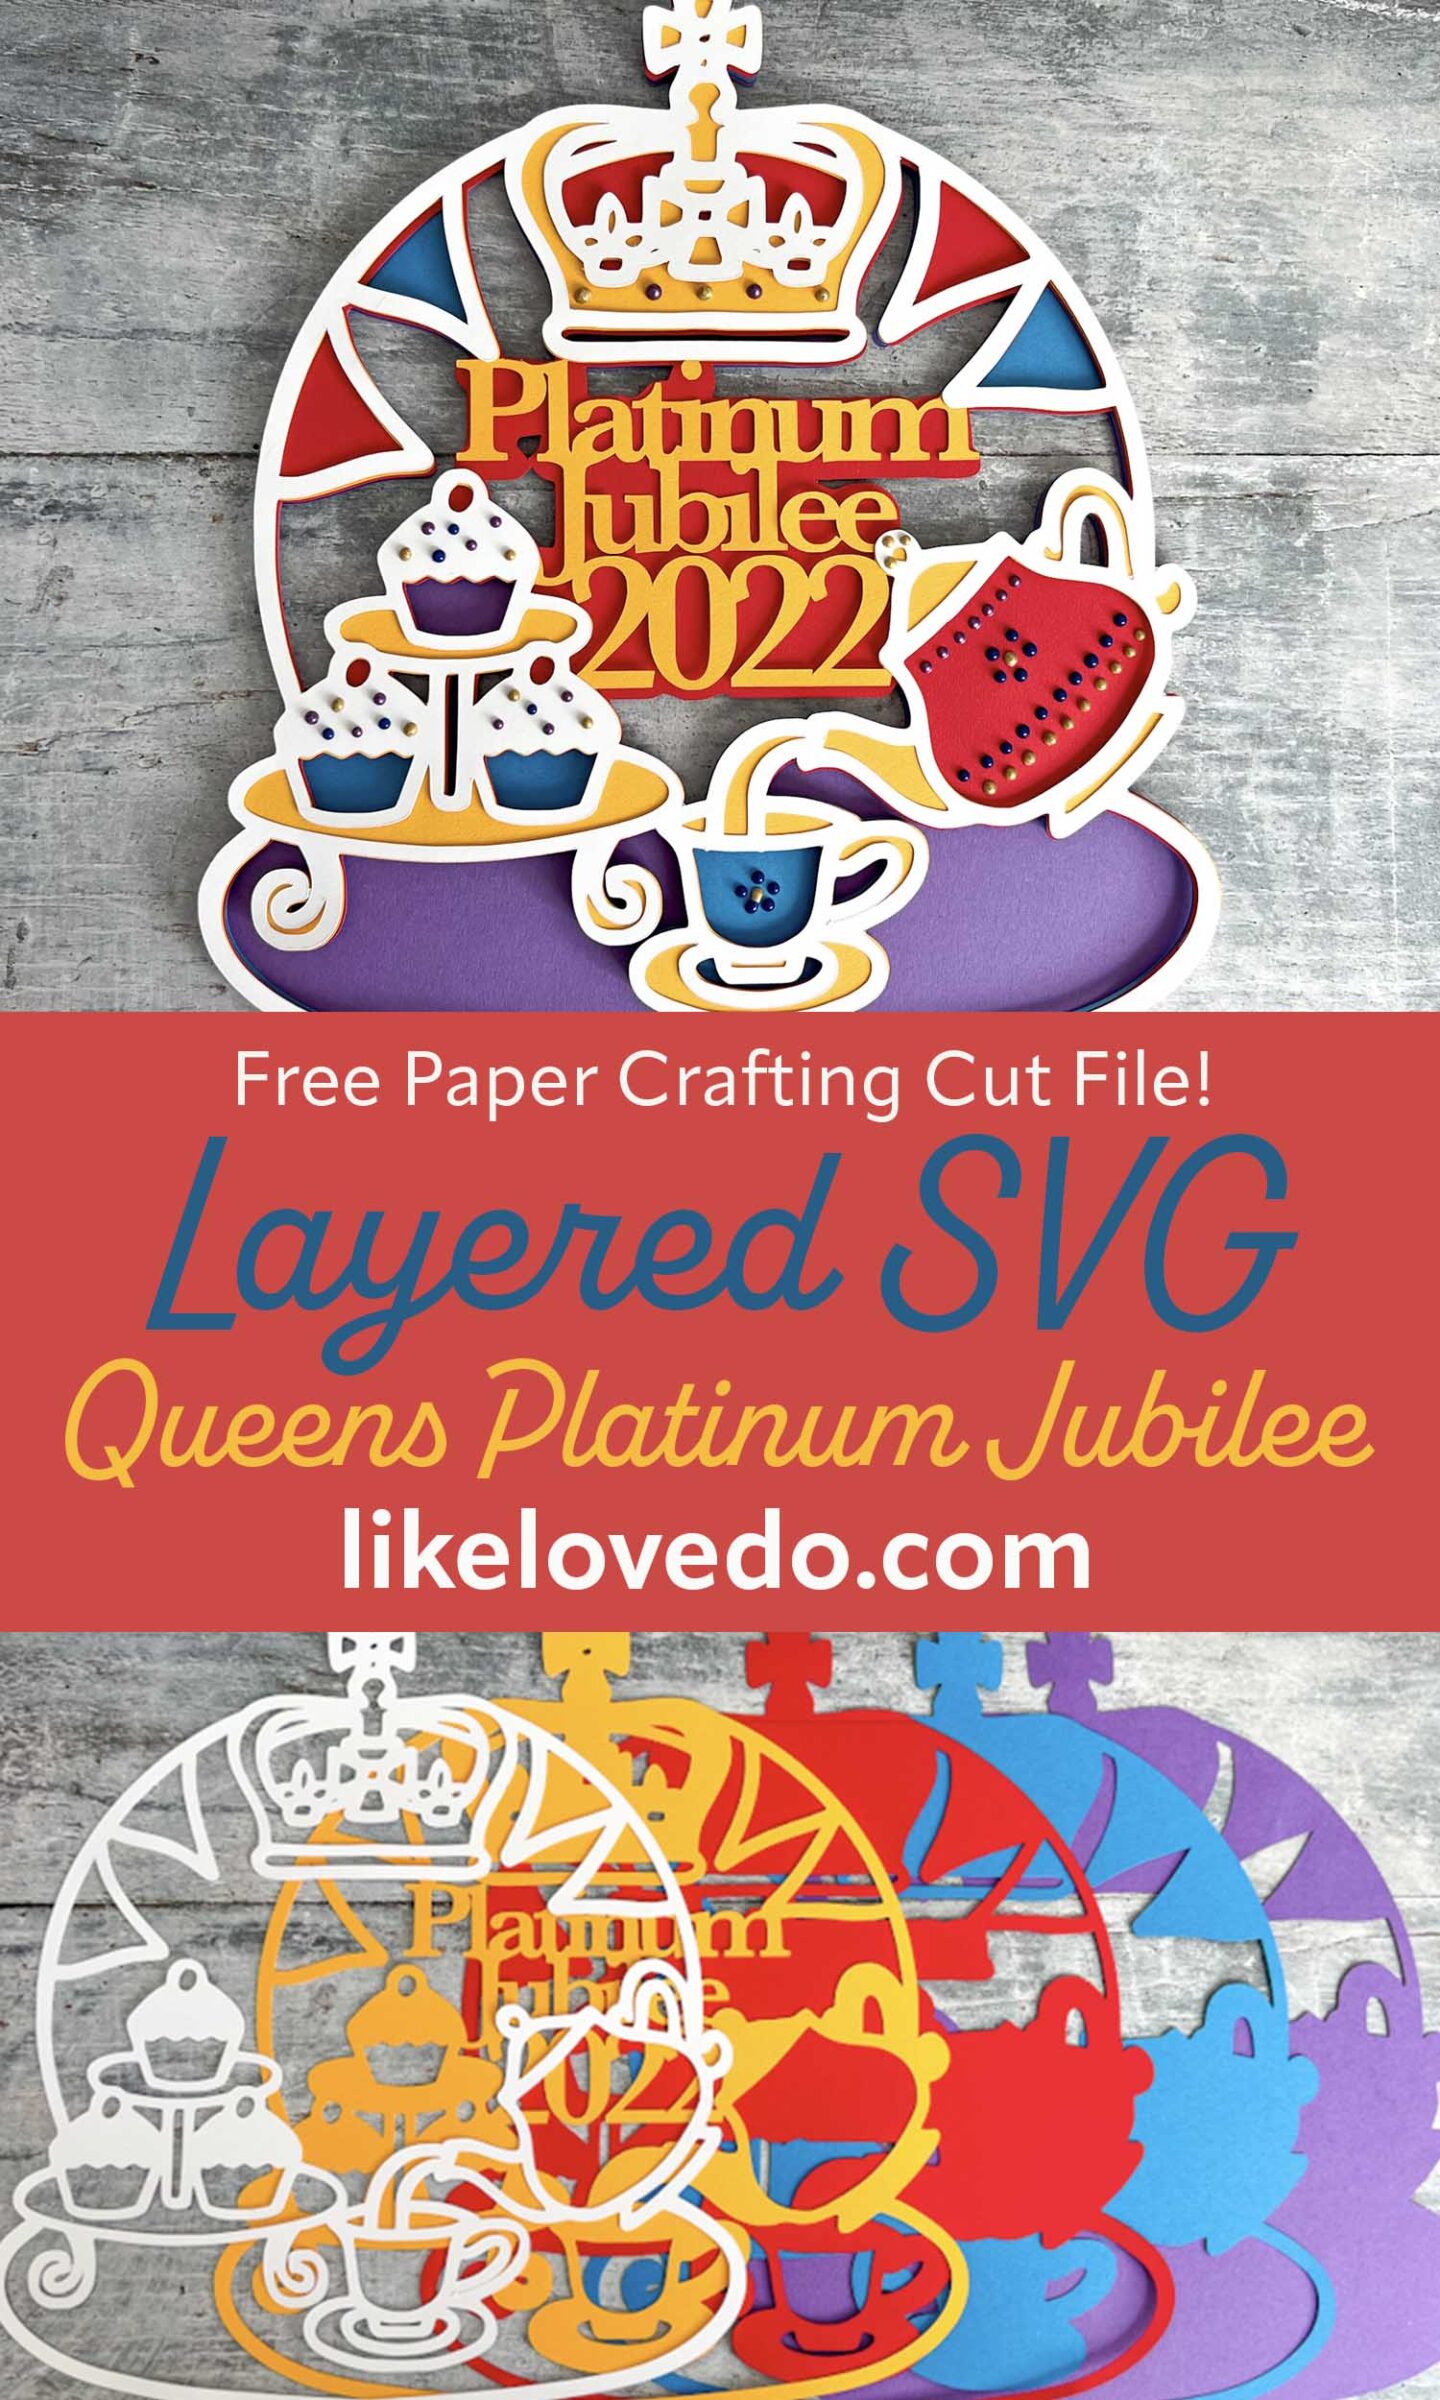 Layered Queens Platinum Jubillee SVG Cutfile for card and papercraft.